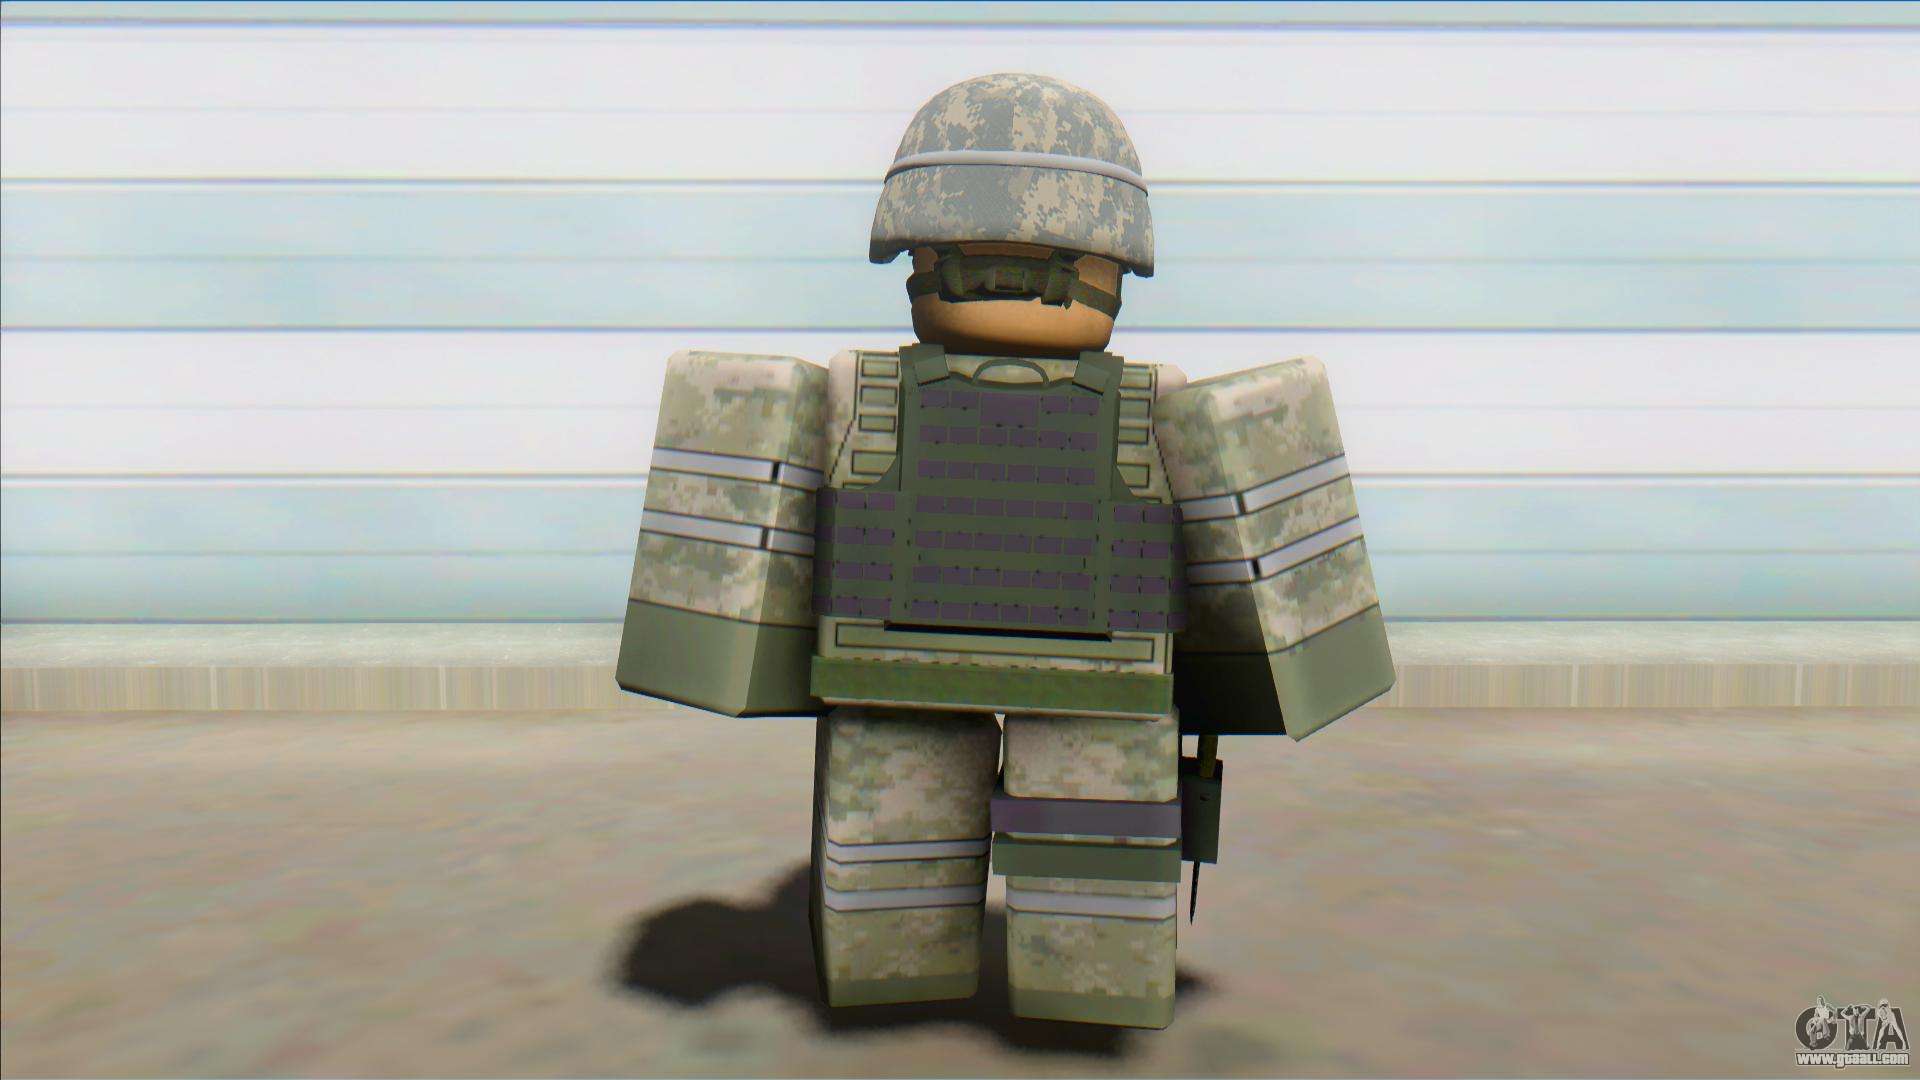 R O B L O X M I L I T A R Y G A M E S Zonealarm Results - best roblox military rp games